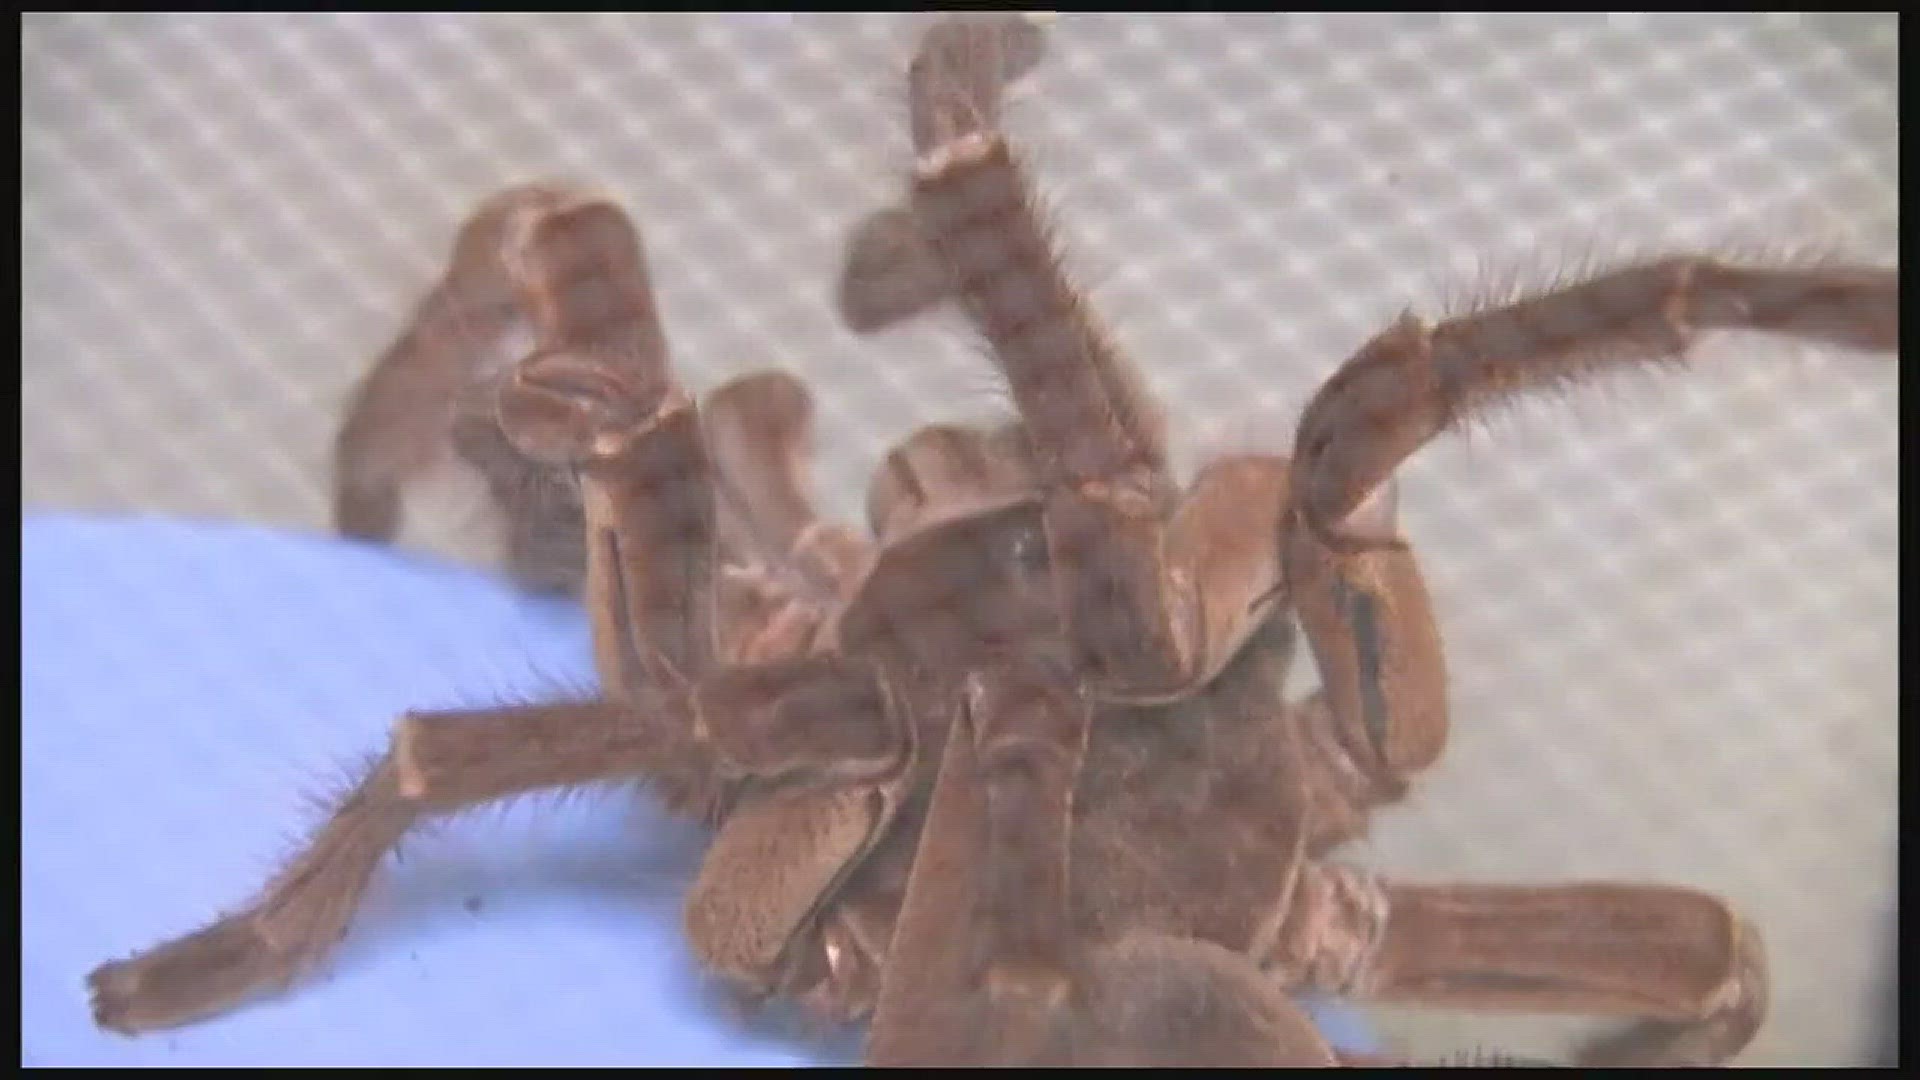 A maintenance man at a southwest Houston apartment complex had quite a shock Tuesday when he found a bunch of tarantulas and scorpions. 59 scorpions and 13 tarantulas were in boxes and plastic cases inside the apartment. Three of the tarantulas had alrea